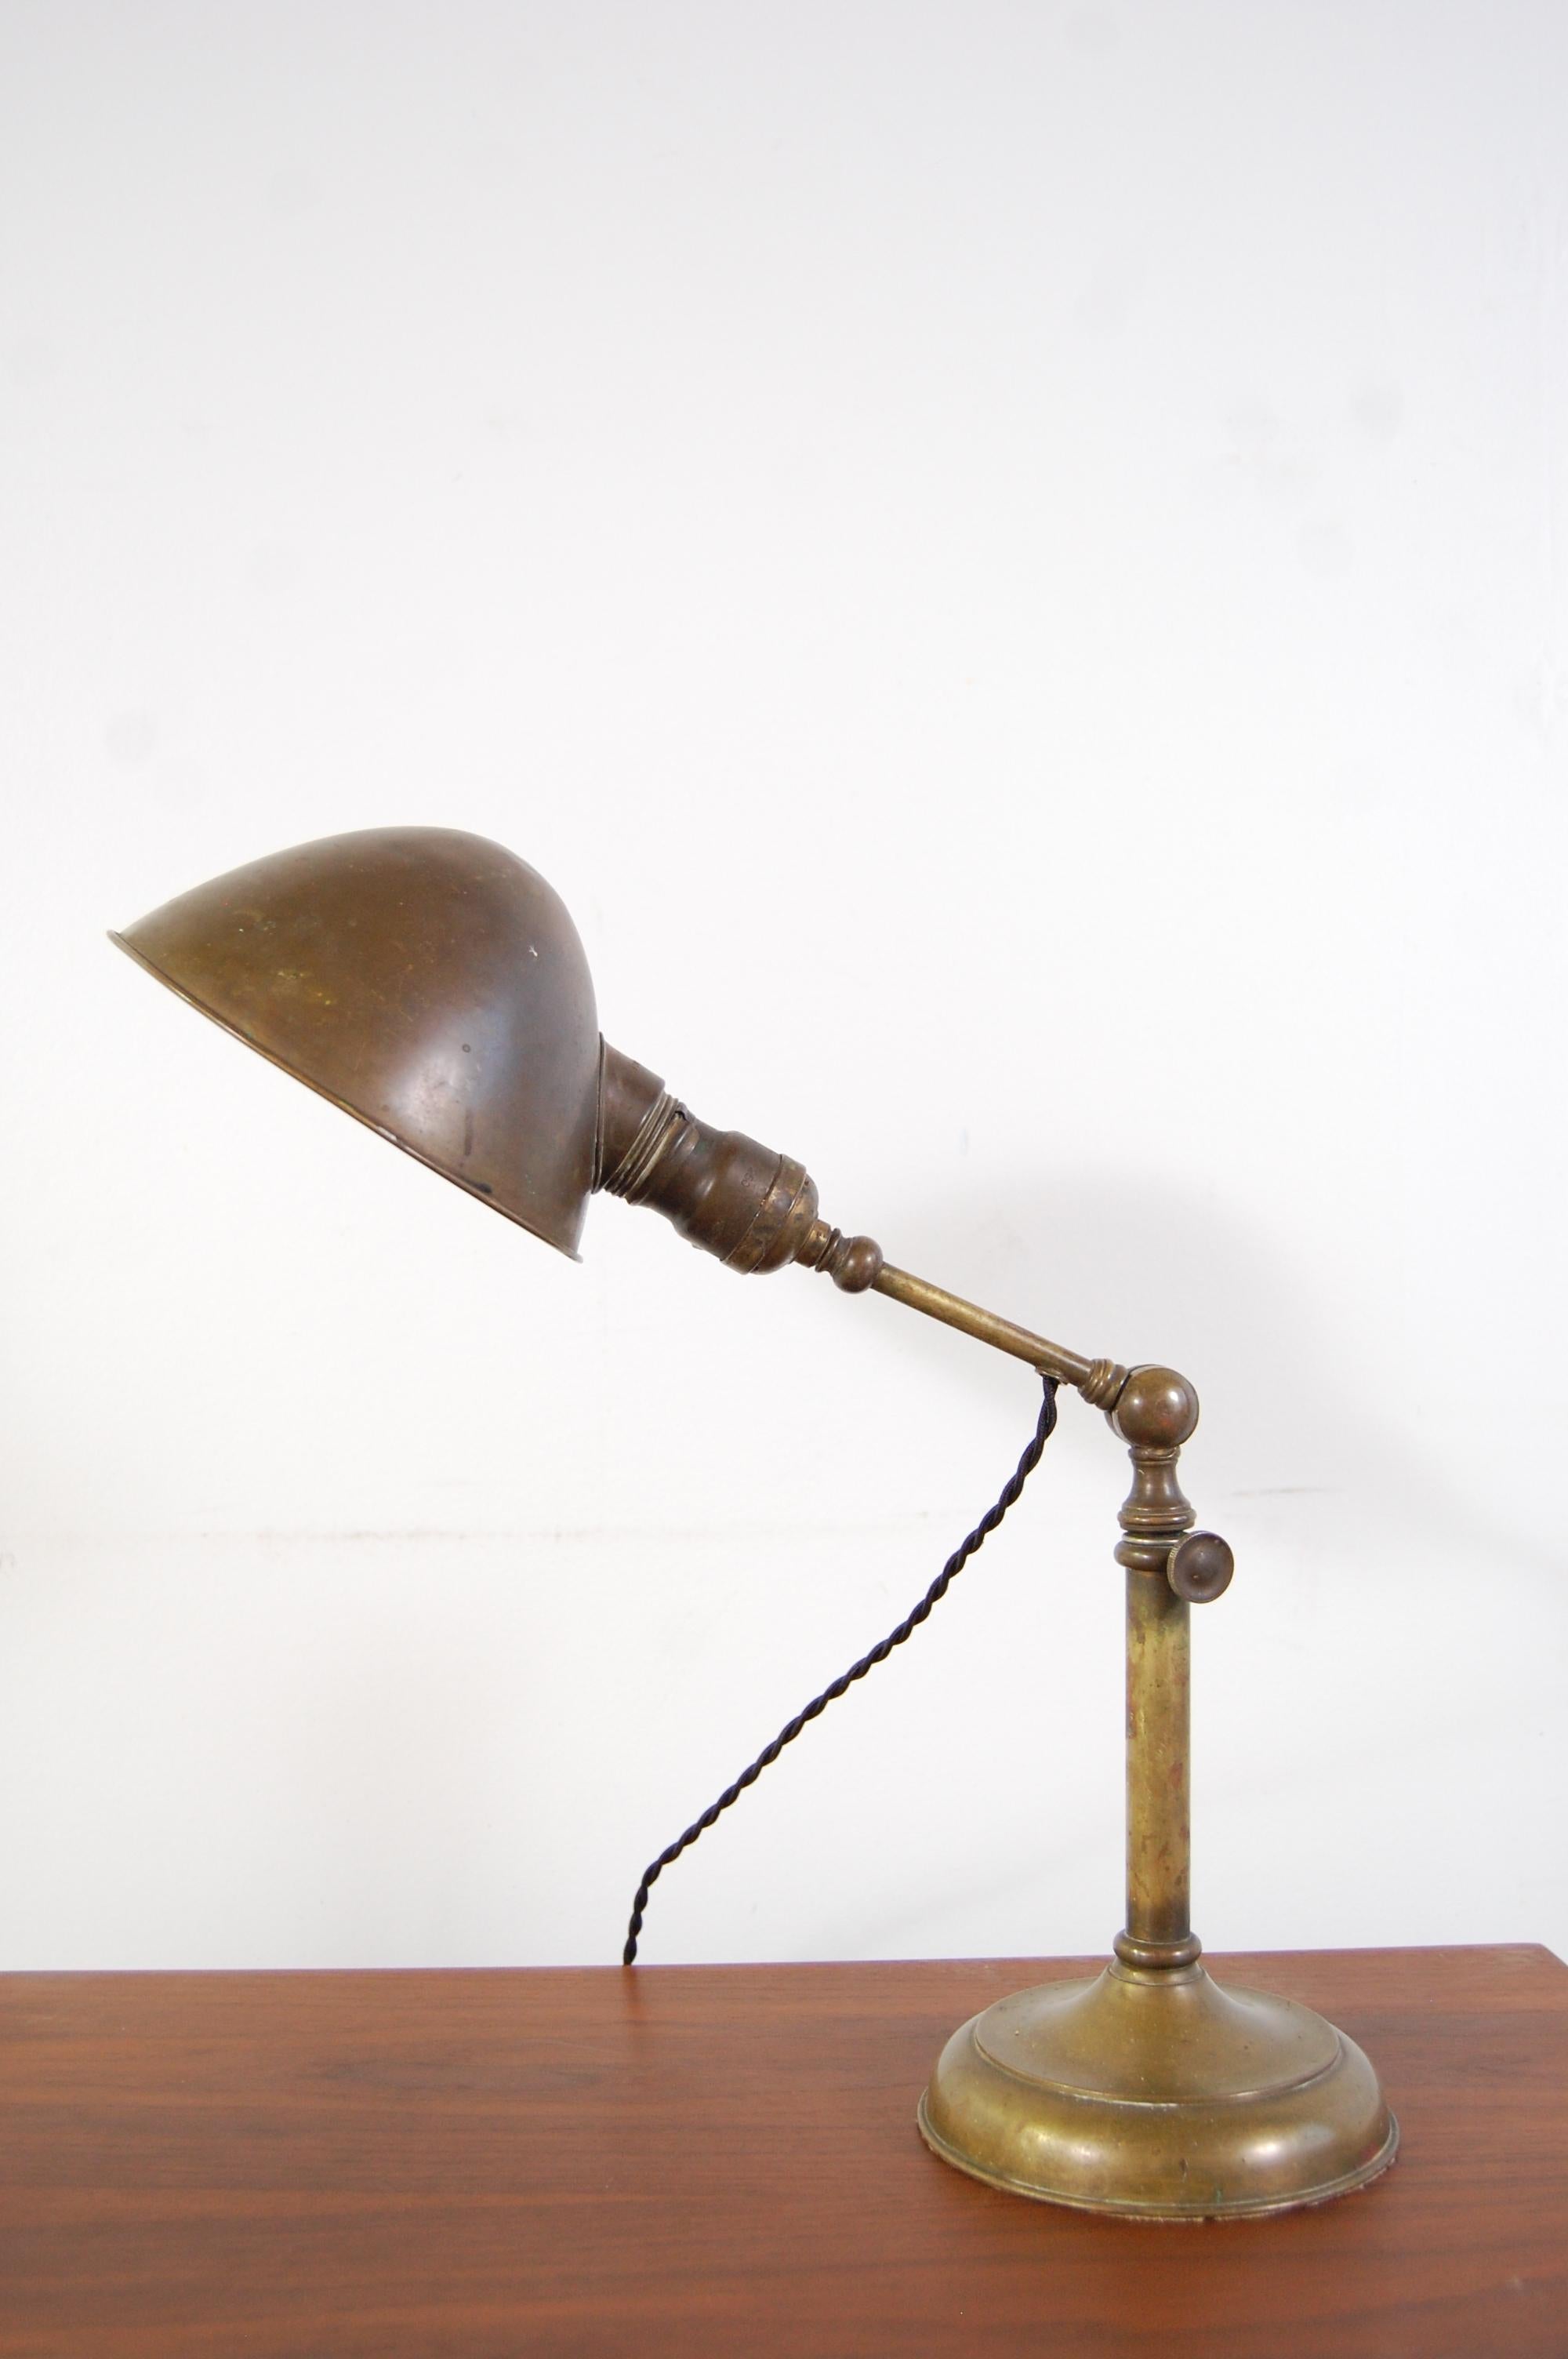 Adjustable brass Jeweler's lamp or desk lamp, circa 1900s. Lamp has been completely re-wired for safety, as all vintage lighting should be. Lamp is approximately 17